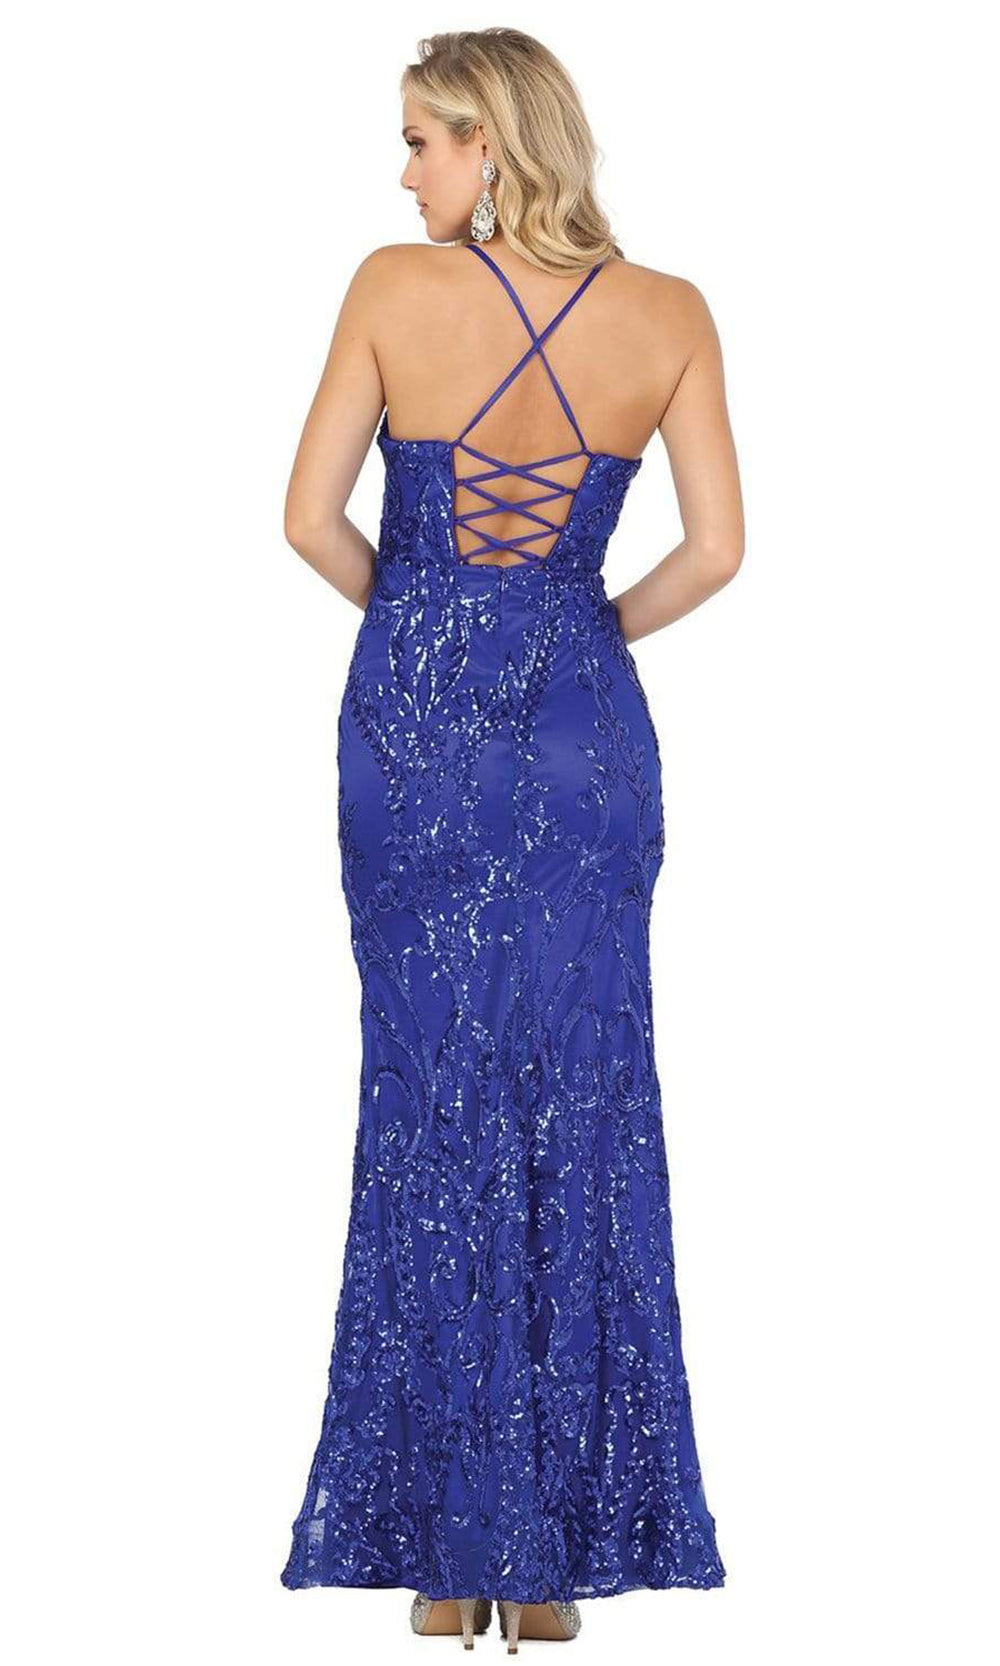 Dancing Queen - Sequined Lace-Up Back Sheath Dress 2914SC